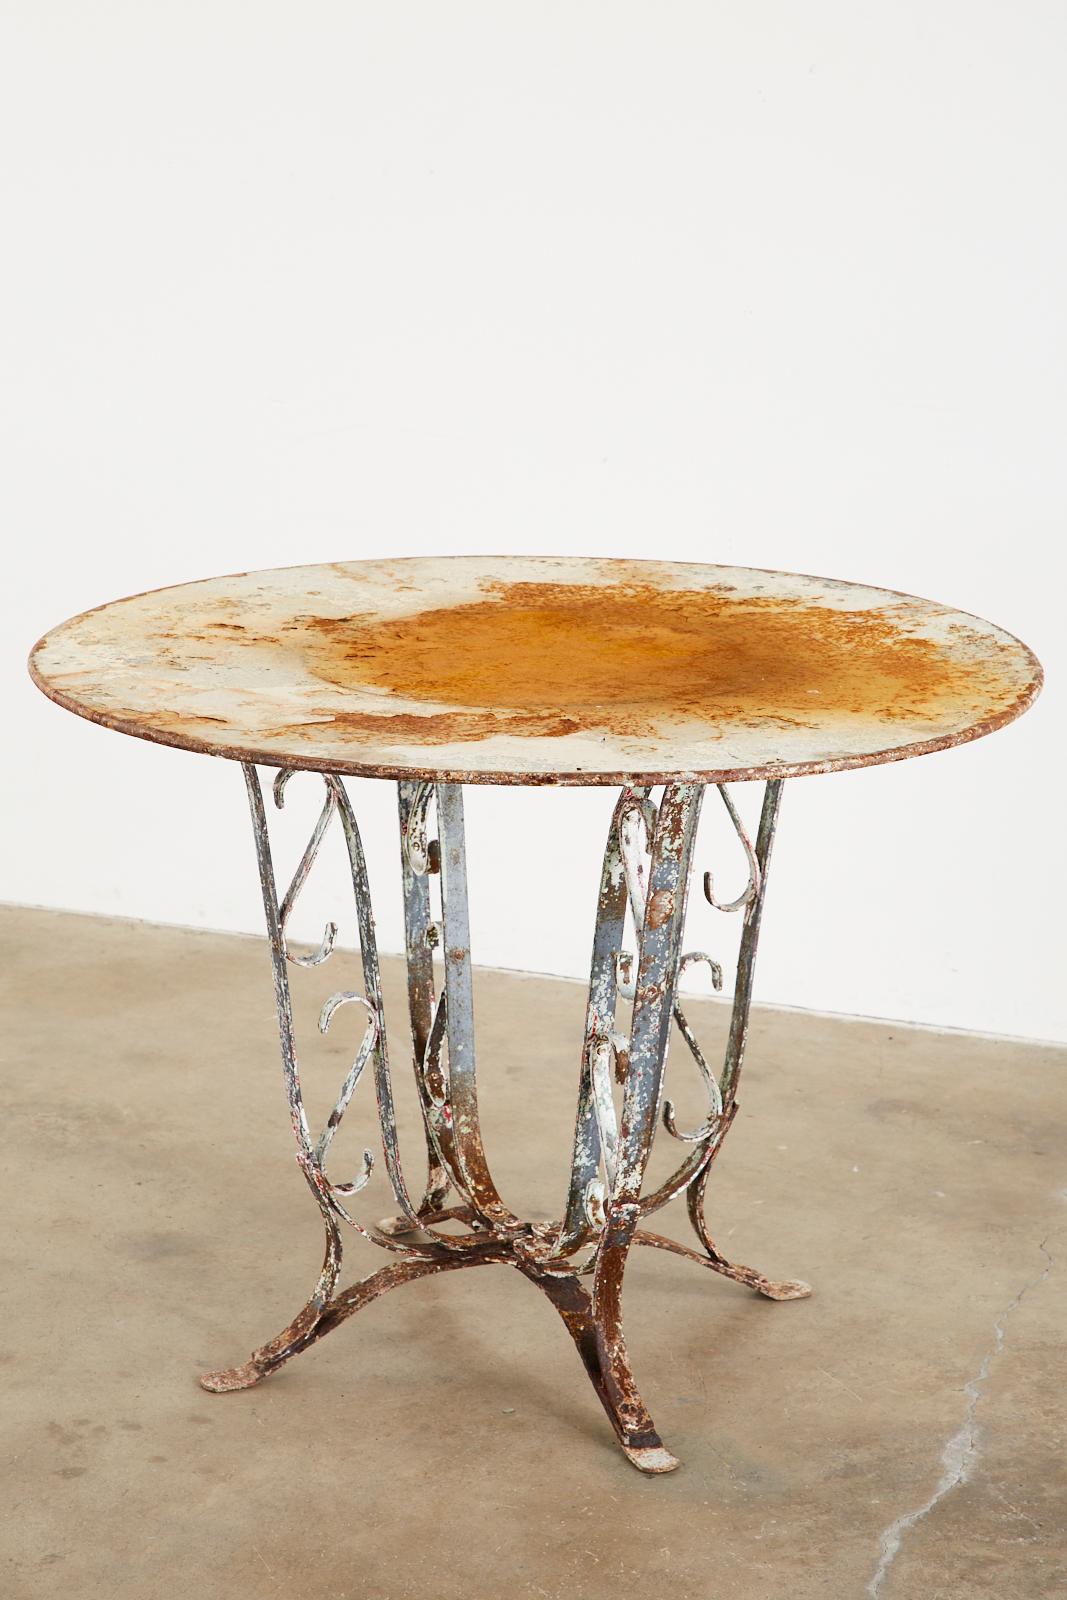 Patinated French art nouveau round garden dining table featuring a sculptural tulip iron base. The round top has rolled edges and is supported by four graceful legs with scroll designs in set. The legs conjoin on bottom and end with flat feet. The